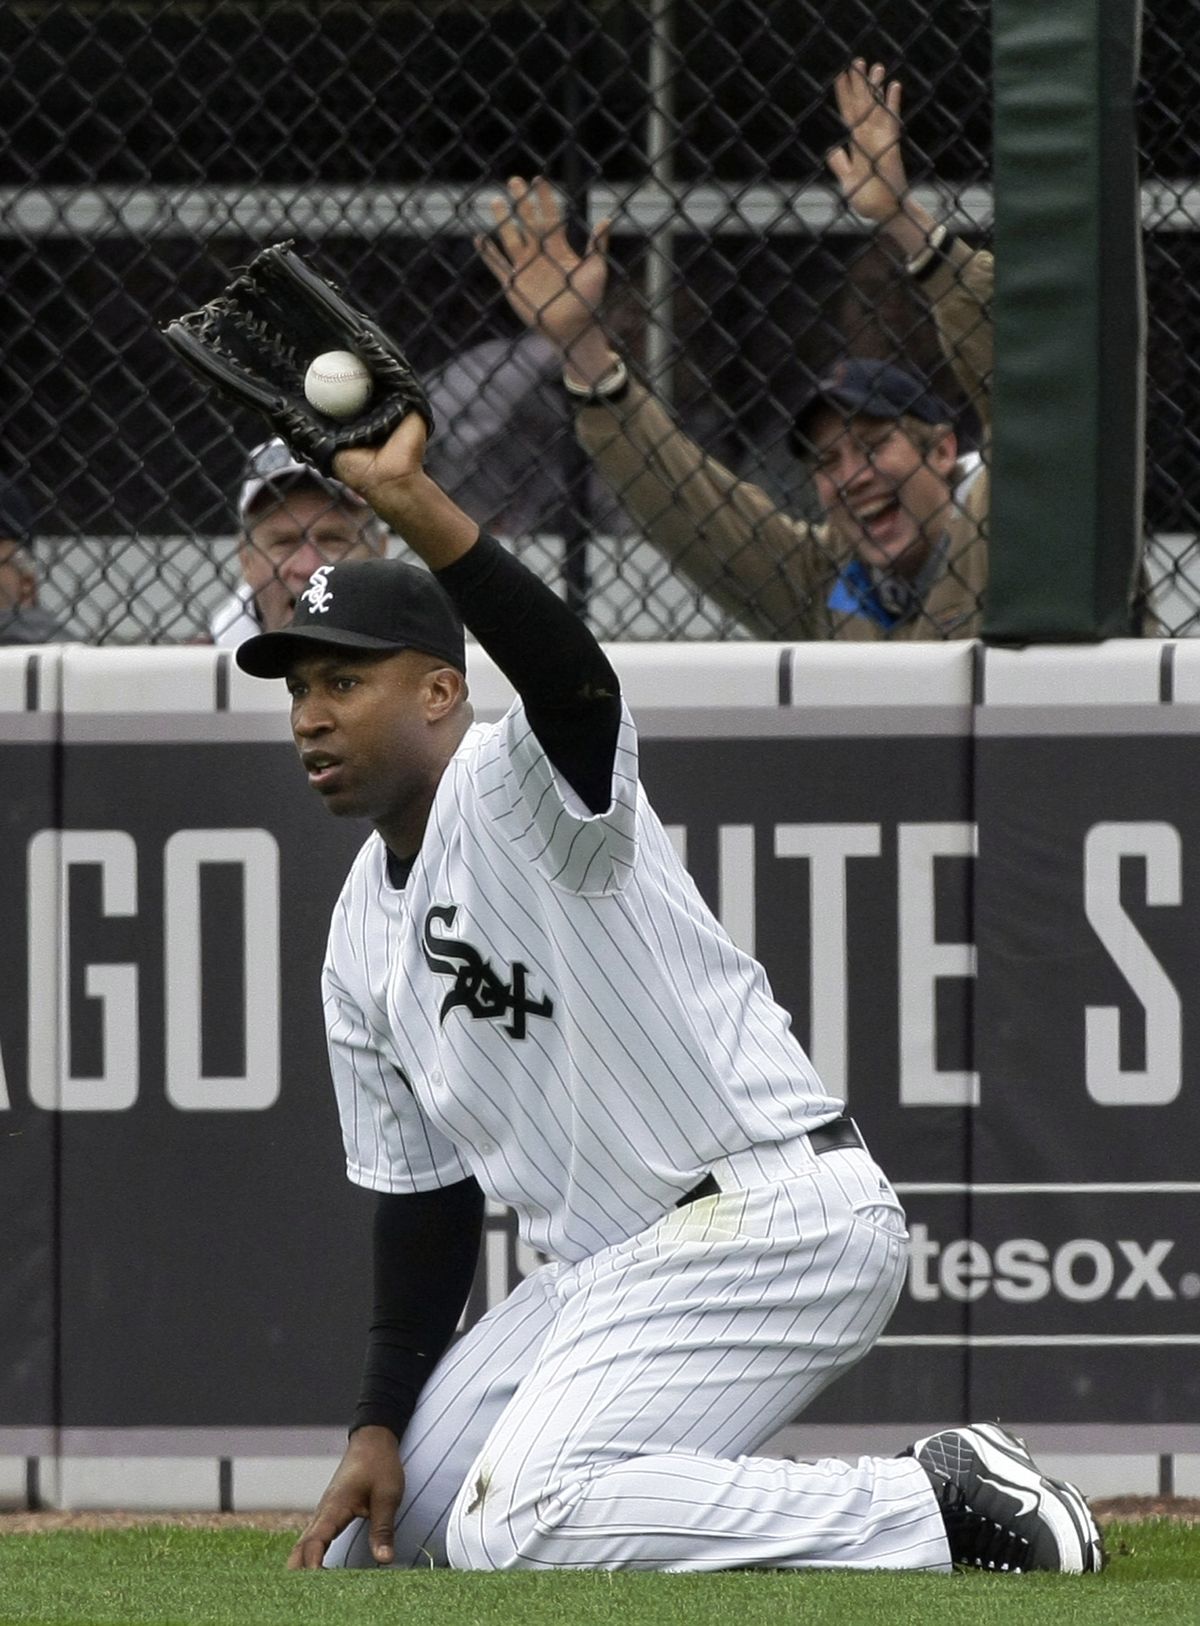 Chicago’s Jermaine Dye displays ball to umpire after making a diving catch. (Associated Press / The Spokesman-Review)